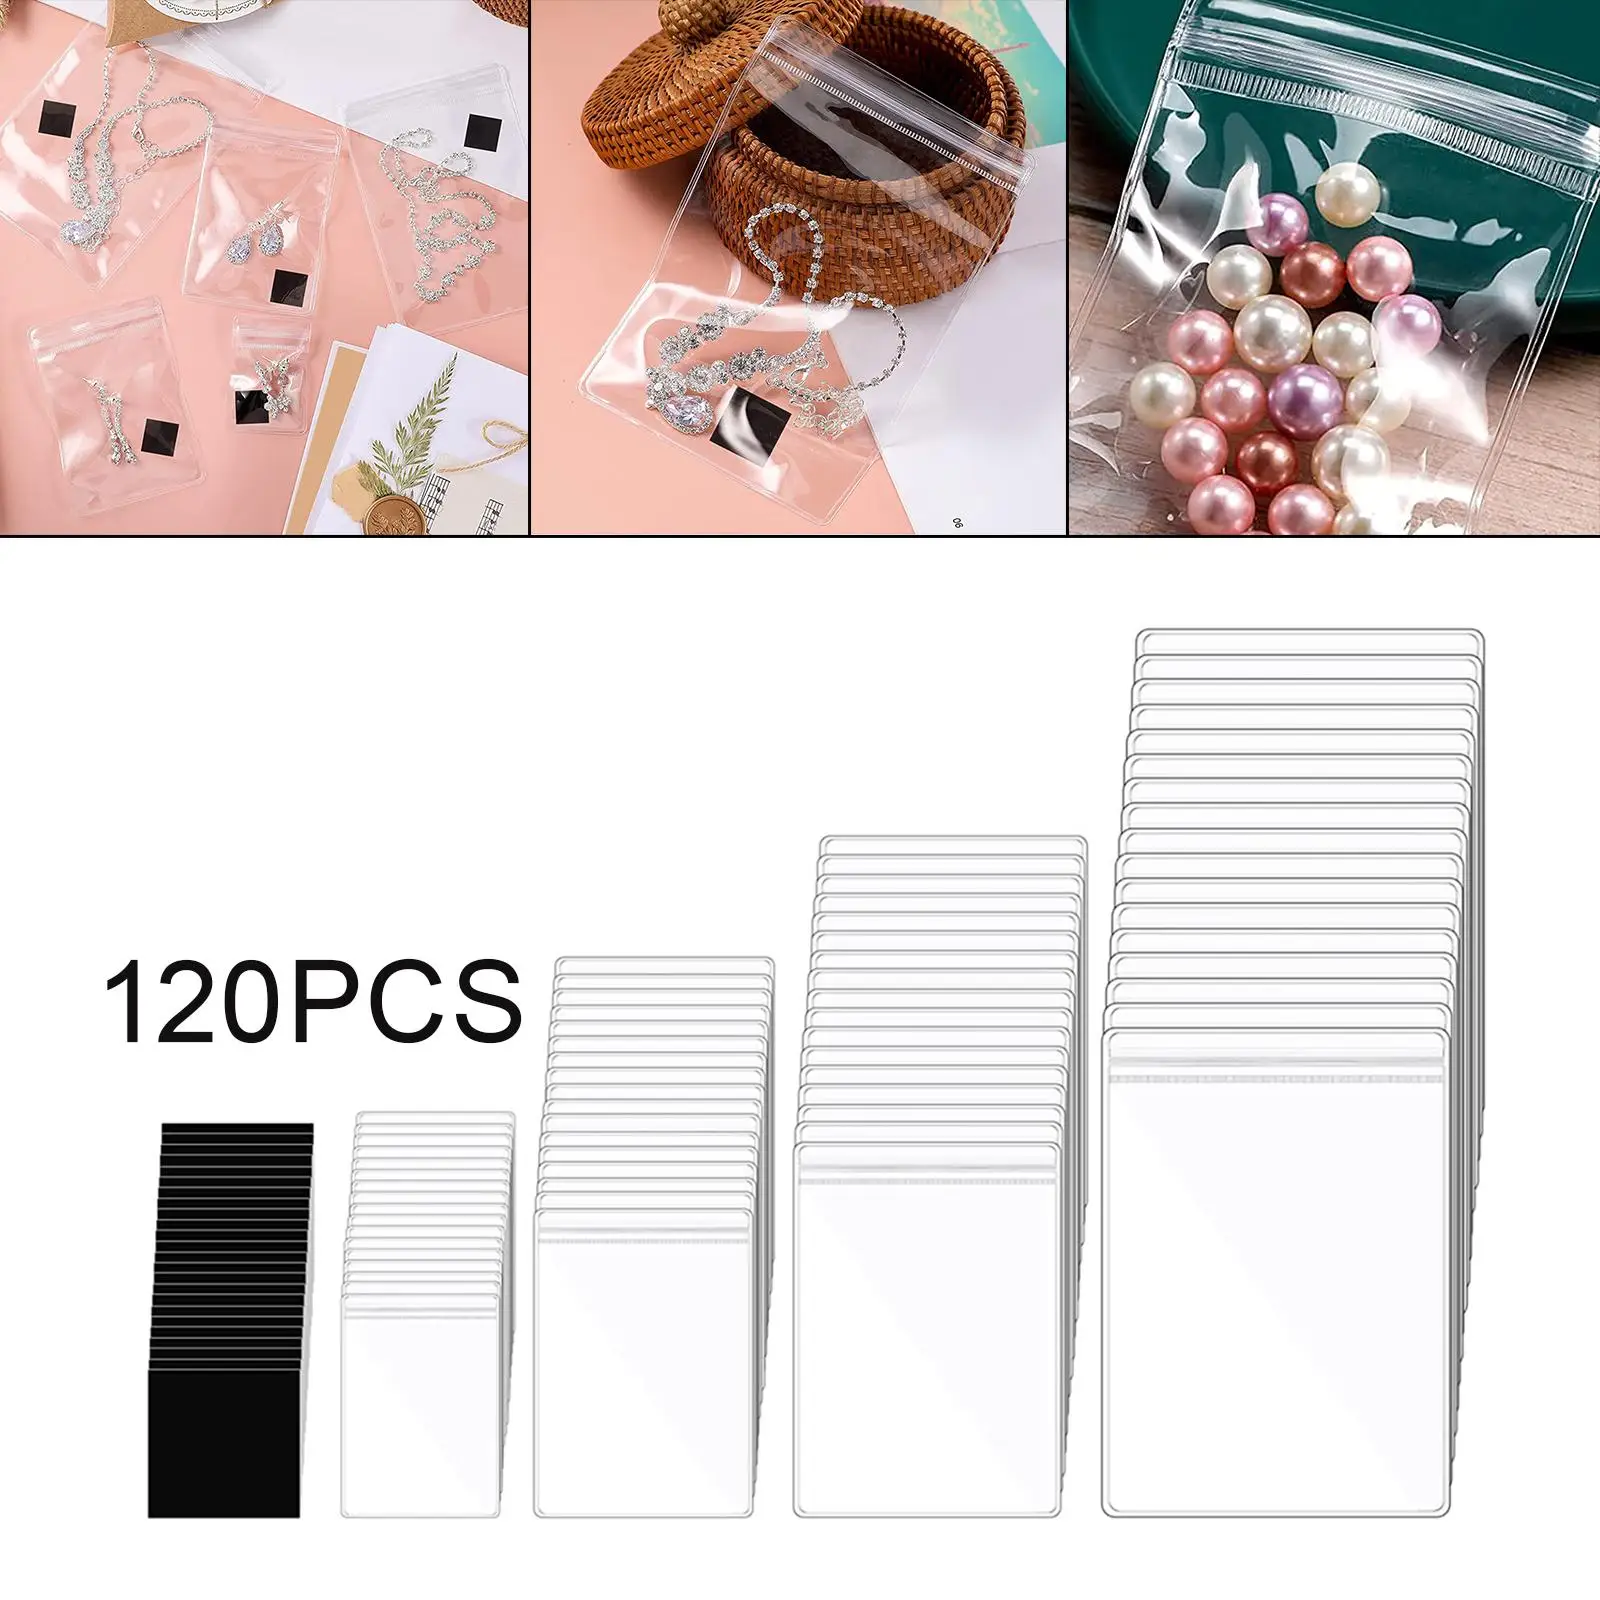 Storage Seal Bags with Antioxidation Sheets Clear Resealable PVC for Jewelry